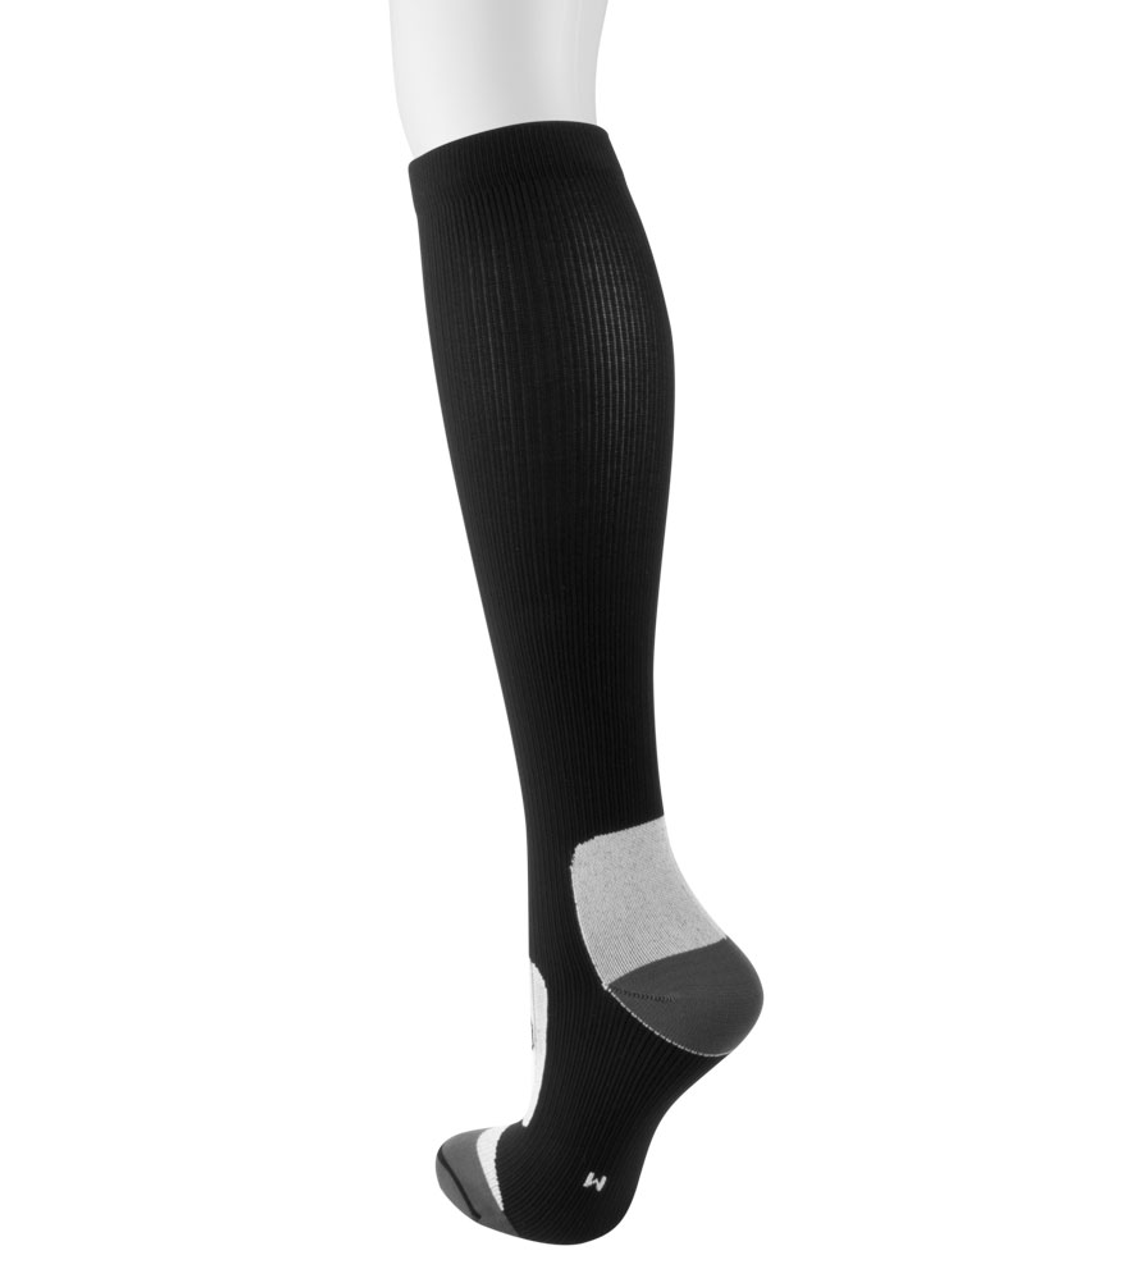 Performance Compression Socks for Running and Cycling Made in the USA